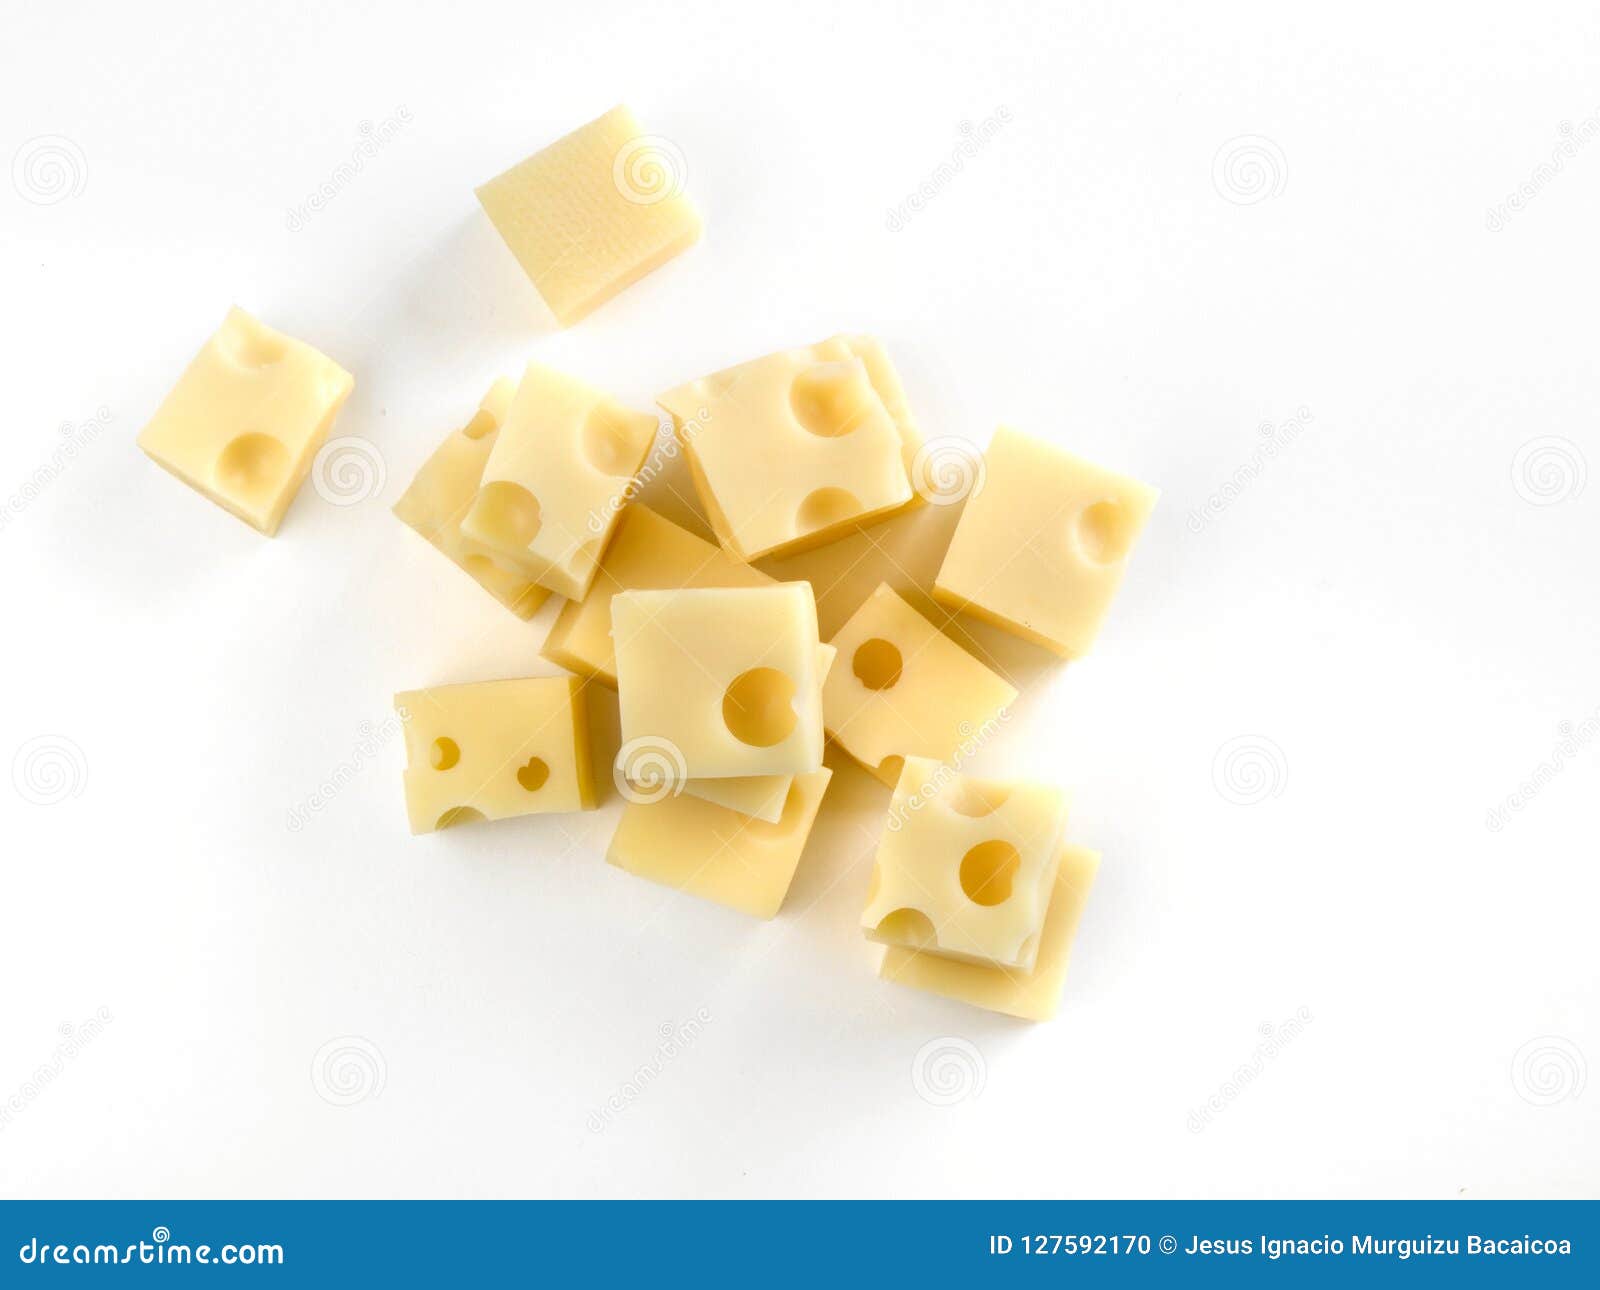 gruyere cheese cubes seen from above on a white table